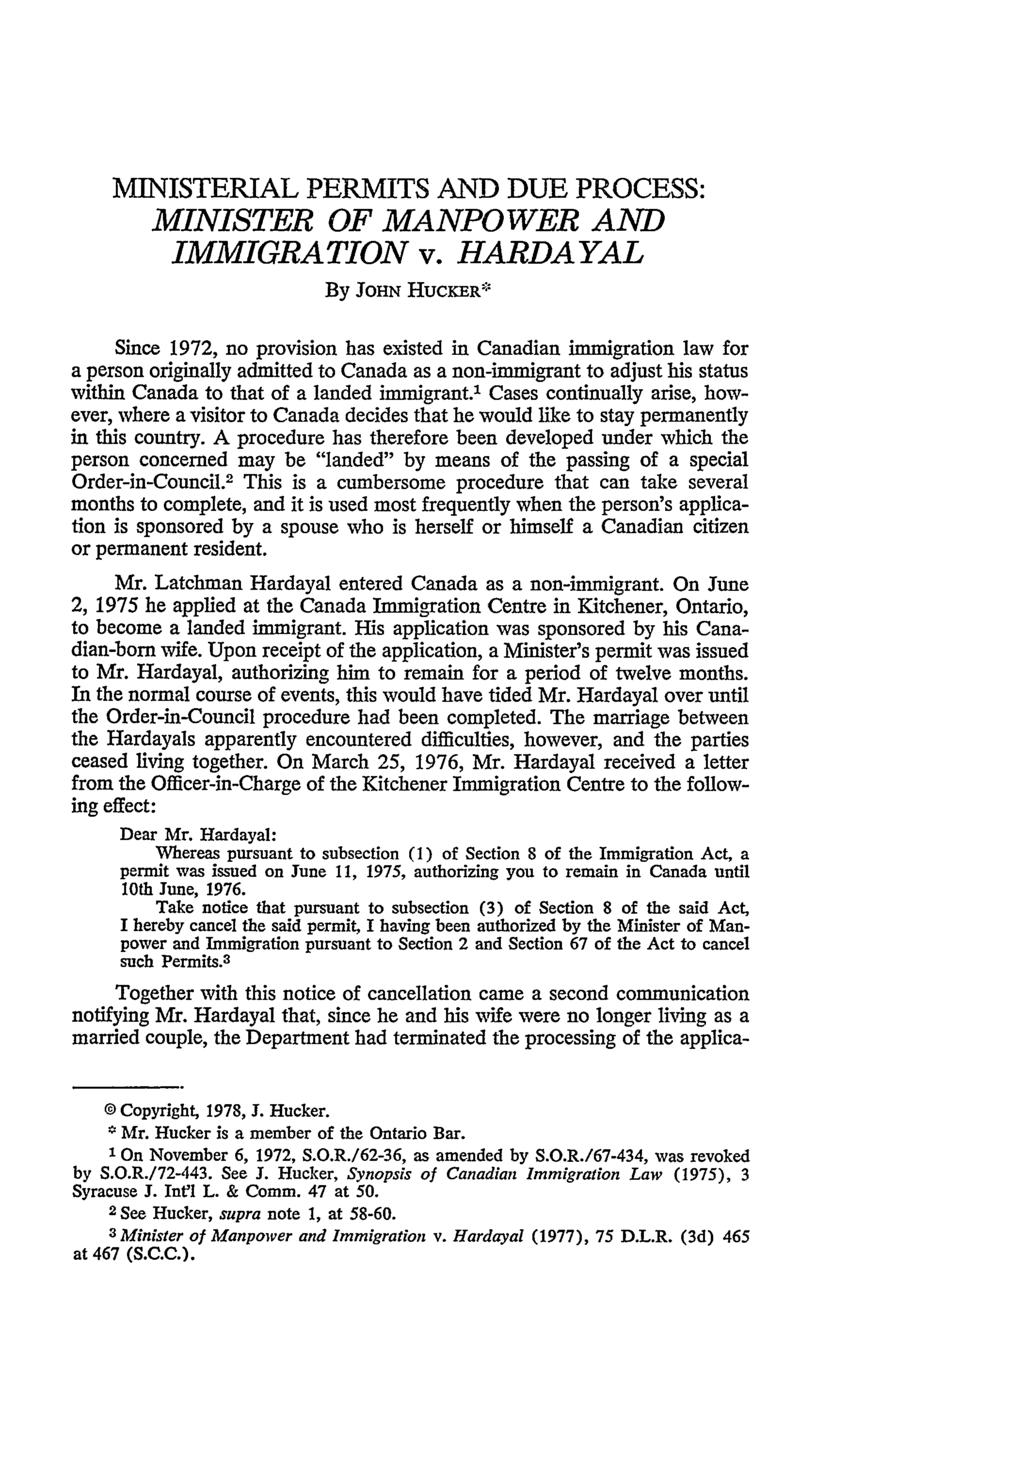 MINISTERIAL PERMITS AND DUE PROCESS: MINISTER OF MANPOWER AND IMMIGRATION v.